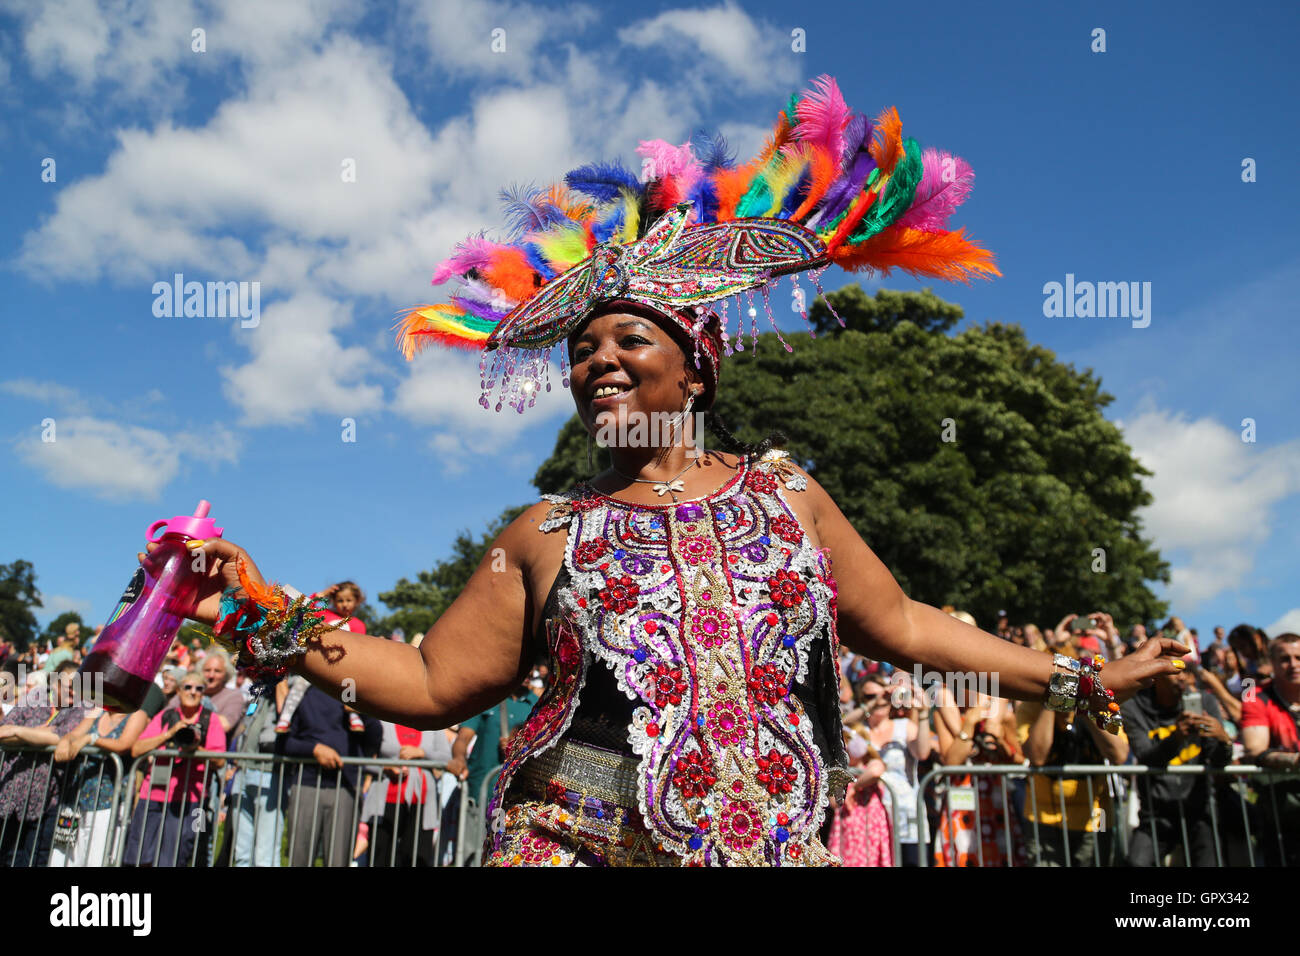 A woman dressed in a brightly coloured feathered headdress dances at the Leeds West Indian Carnival in Leeds, West Yorkshire. Stock Photo